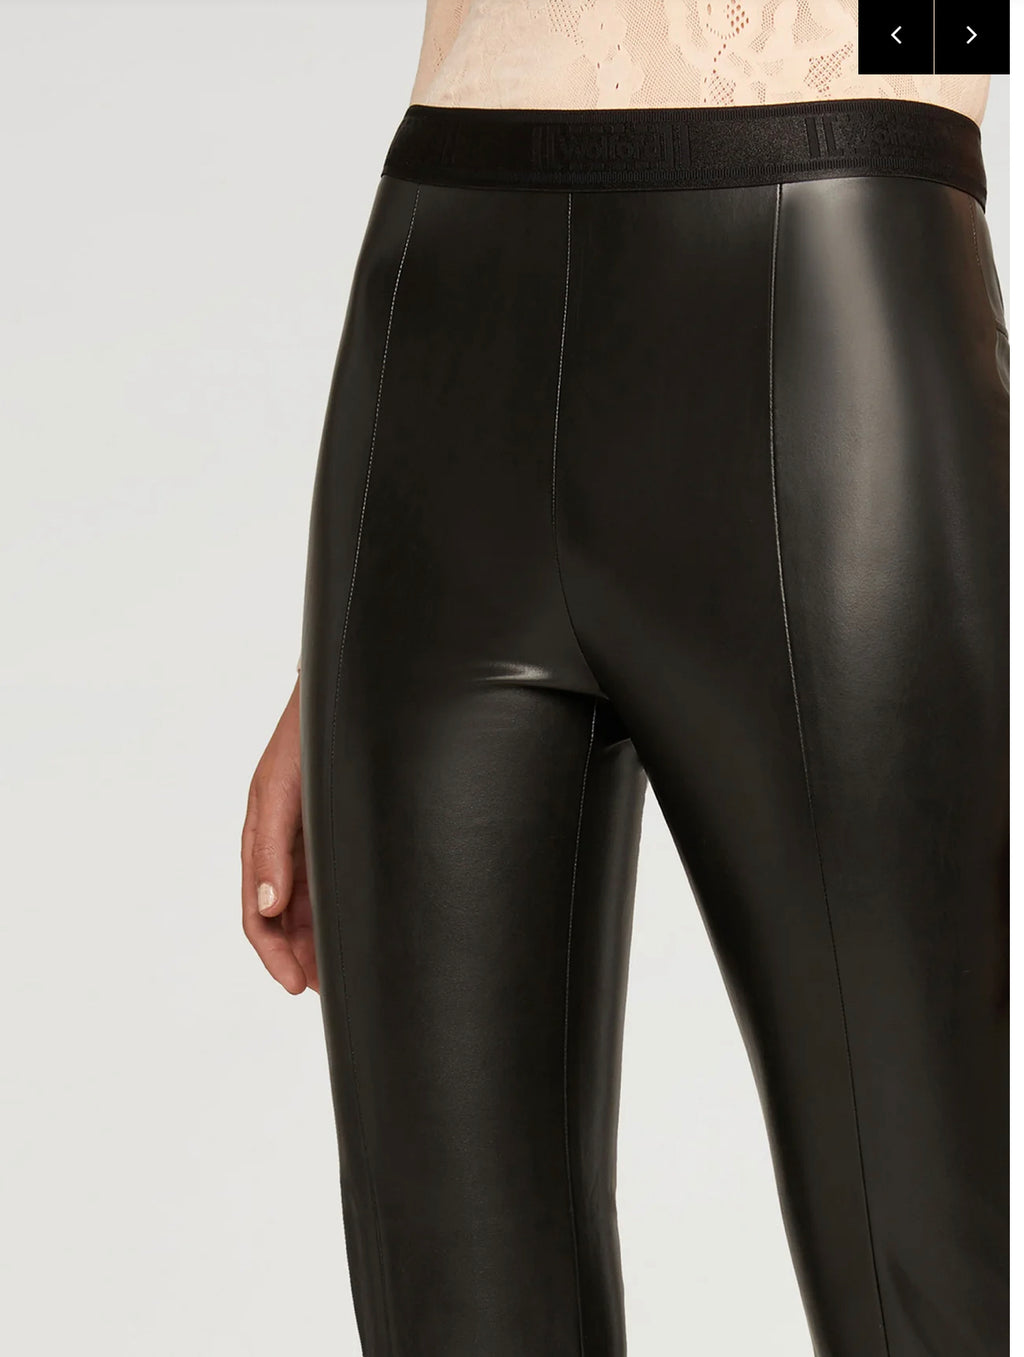 Wolford - Jenna Vegan Leather Trousers